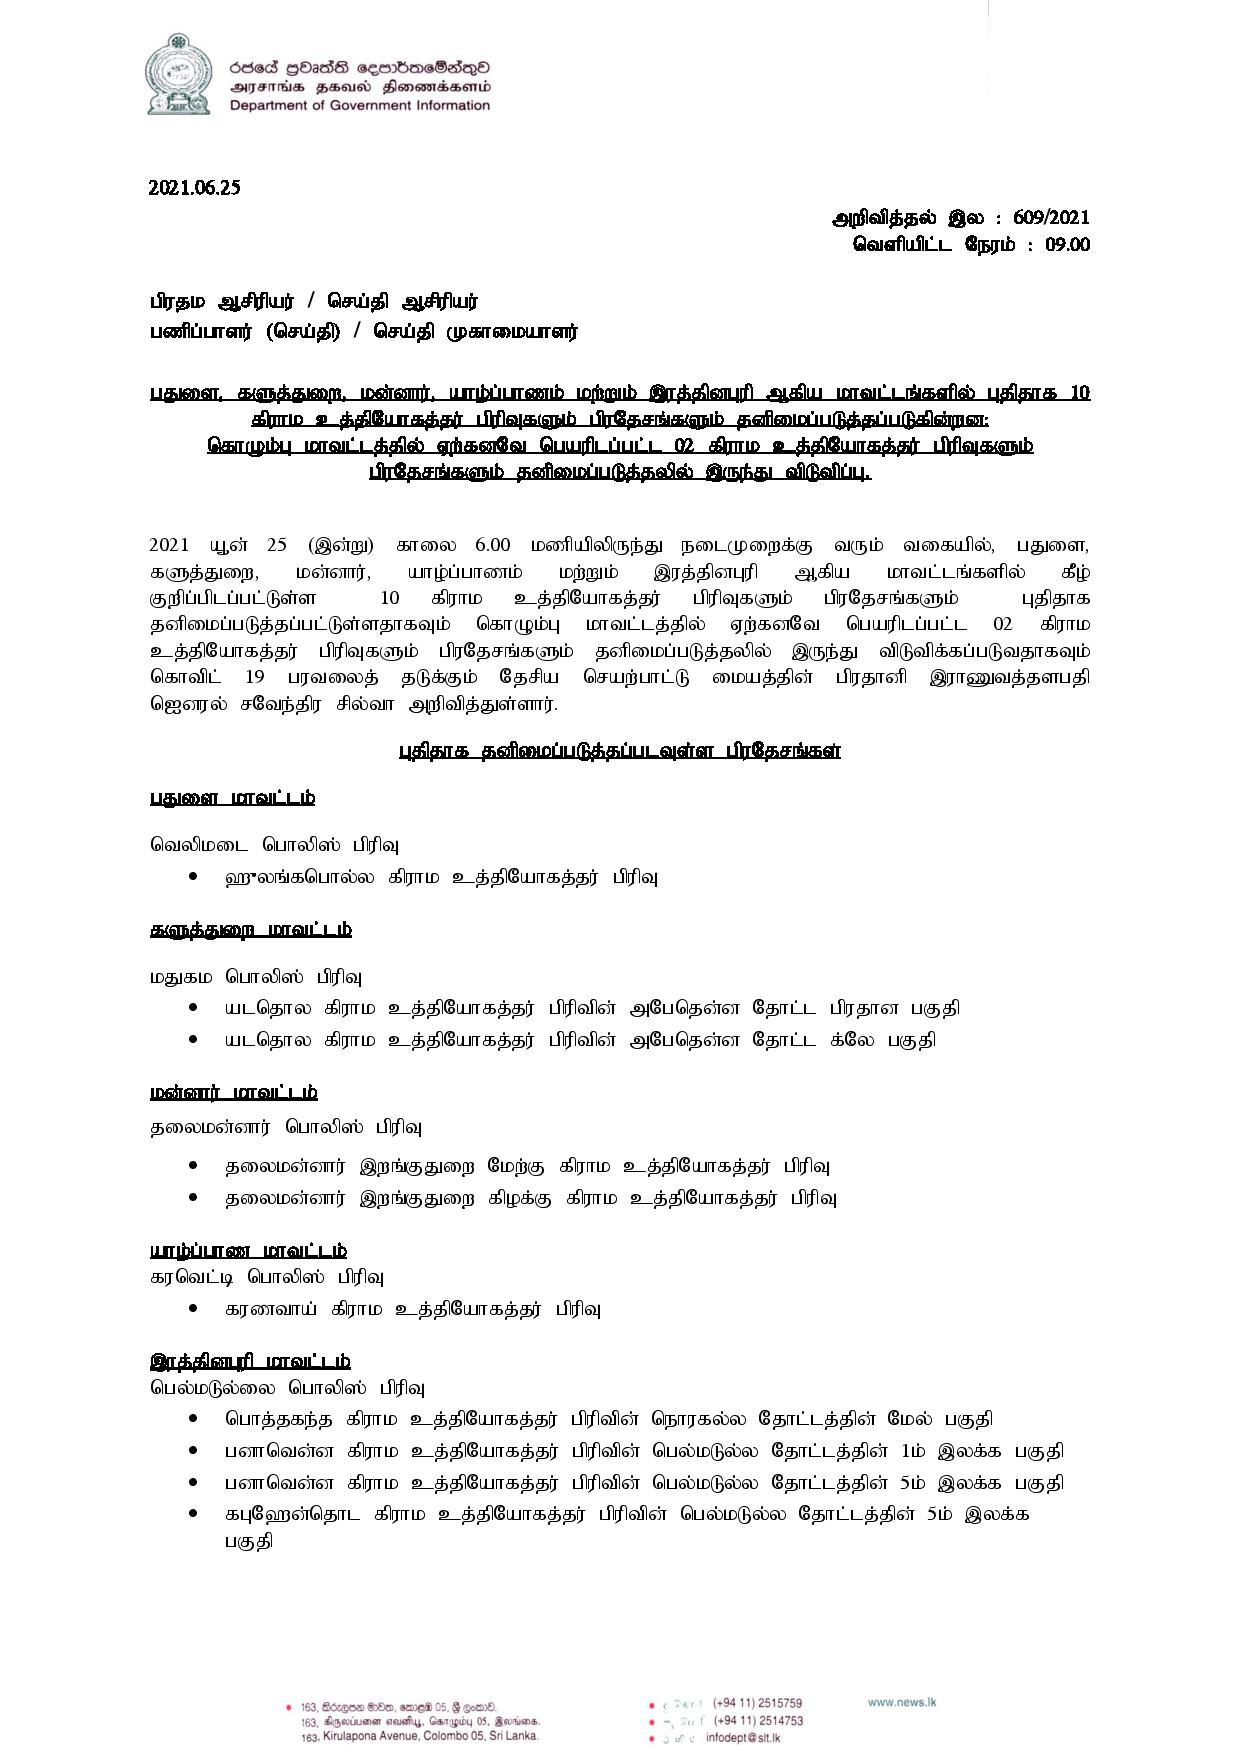 Press Release 609 Tamil page 001